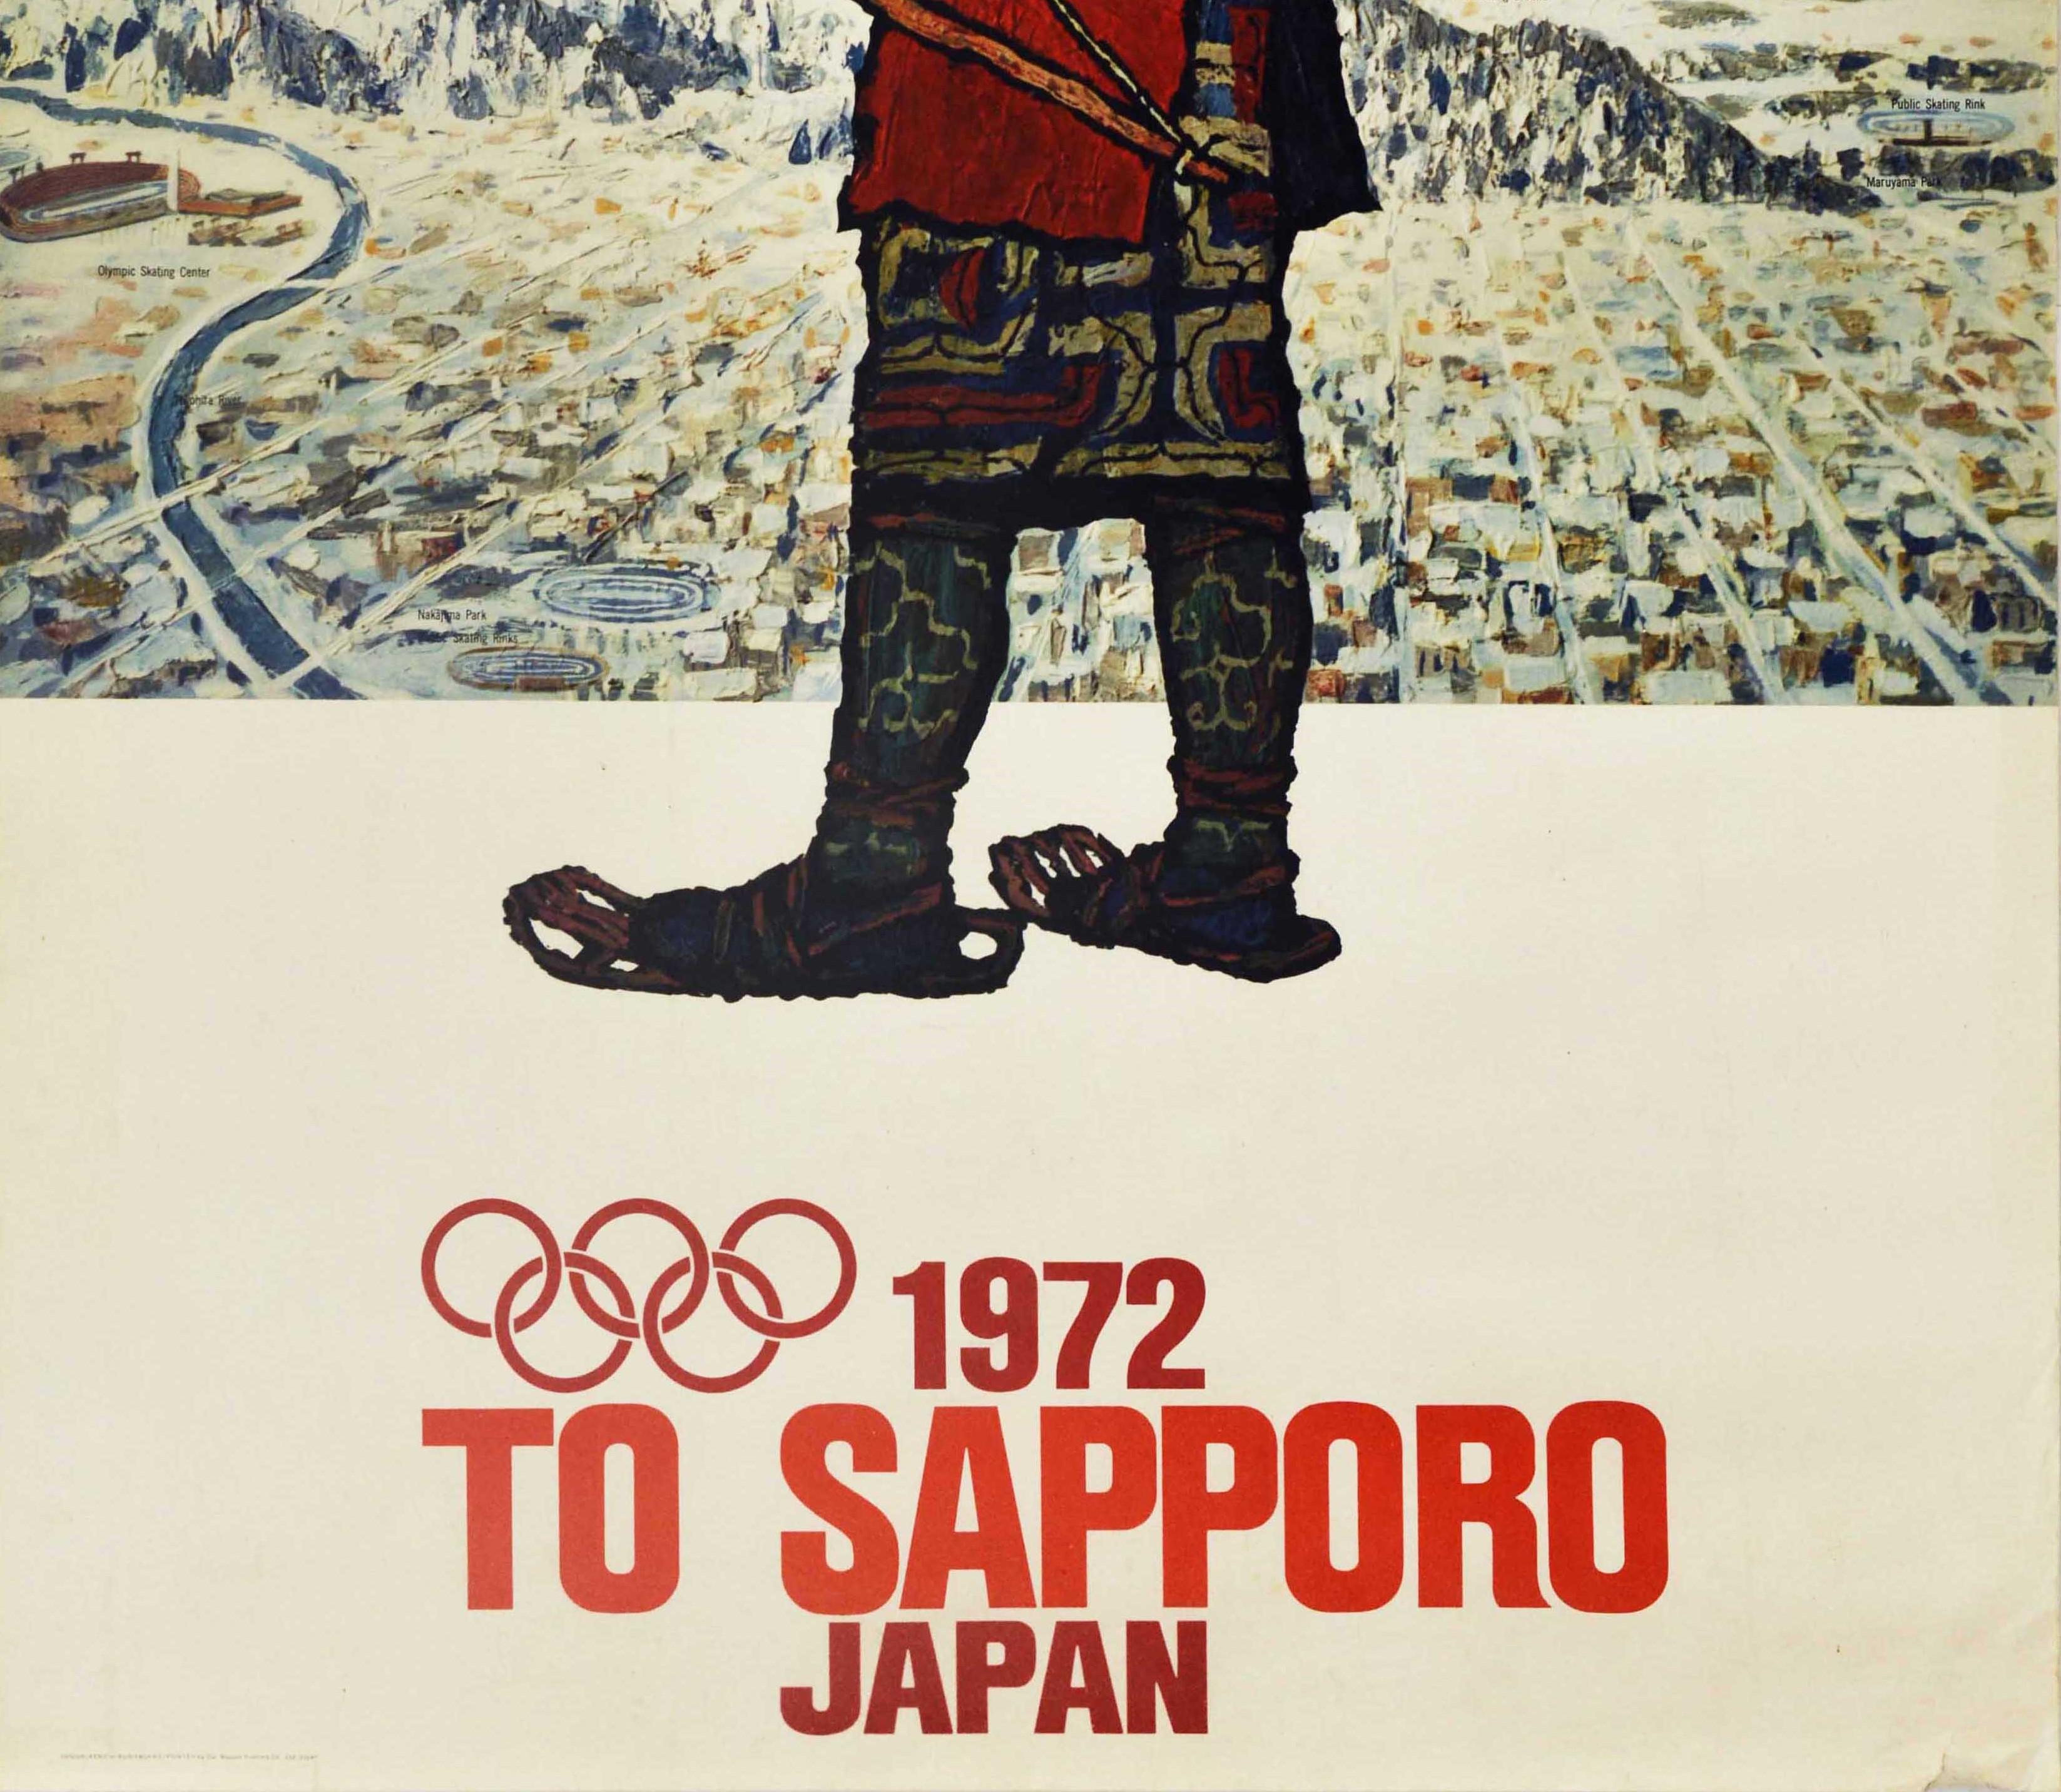 Japanese Original Vintage Poster To Sapporo Japan 1972 Winter Olympic Games Warrior Art